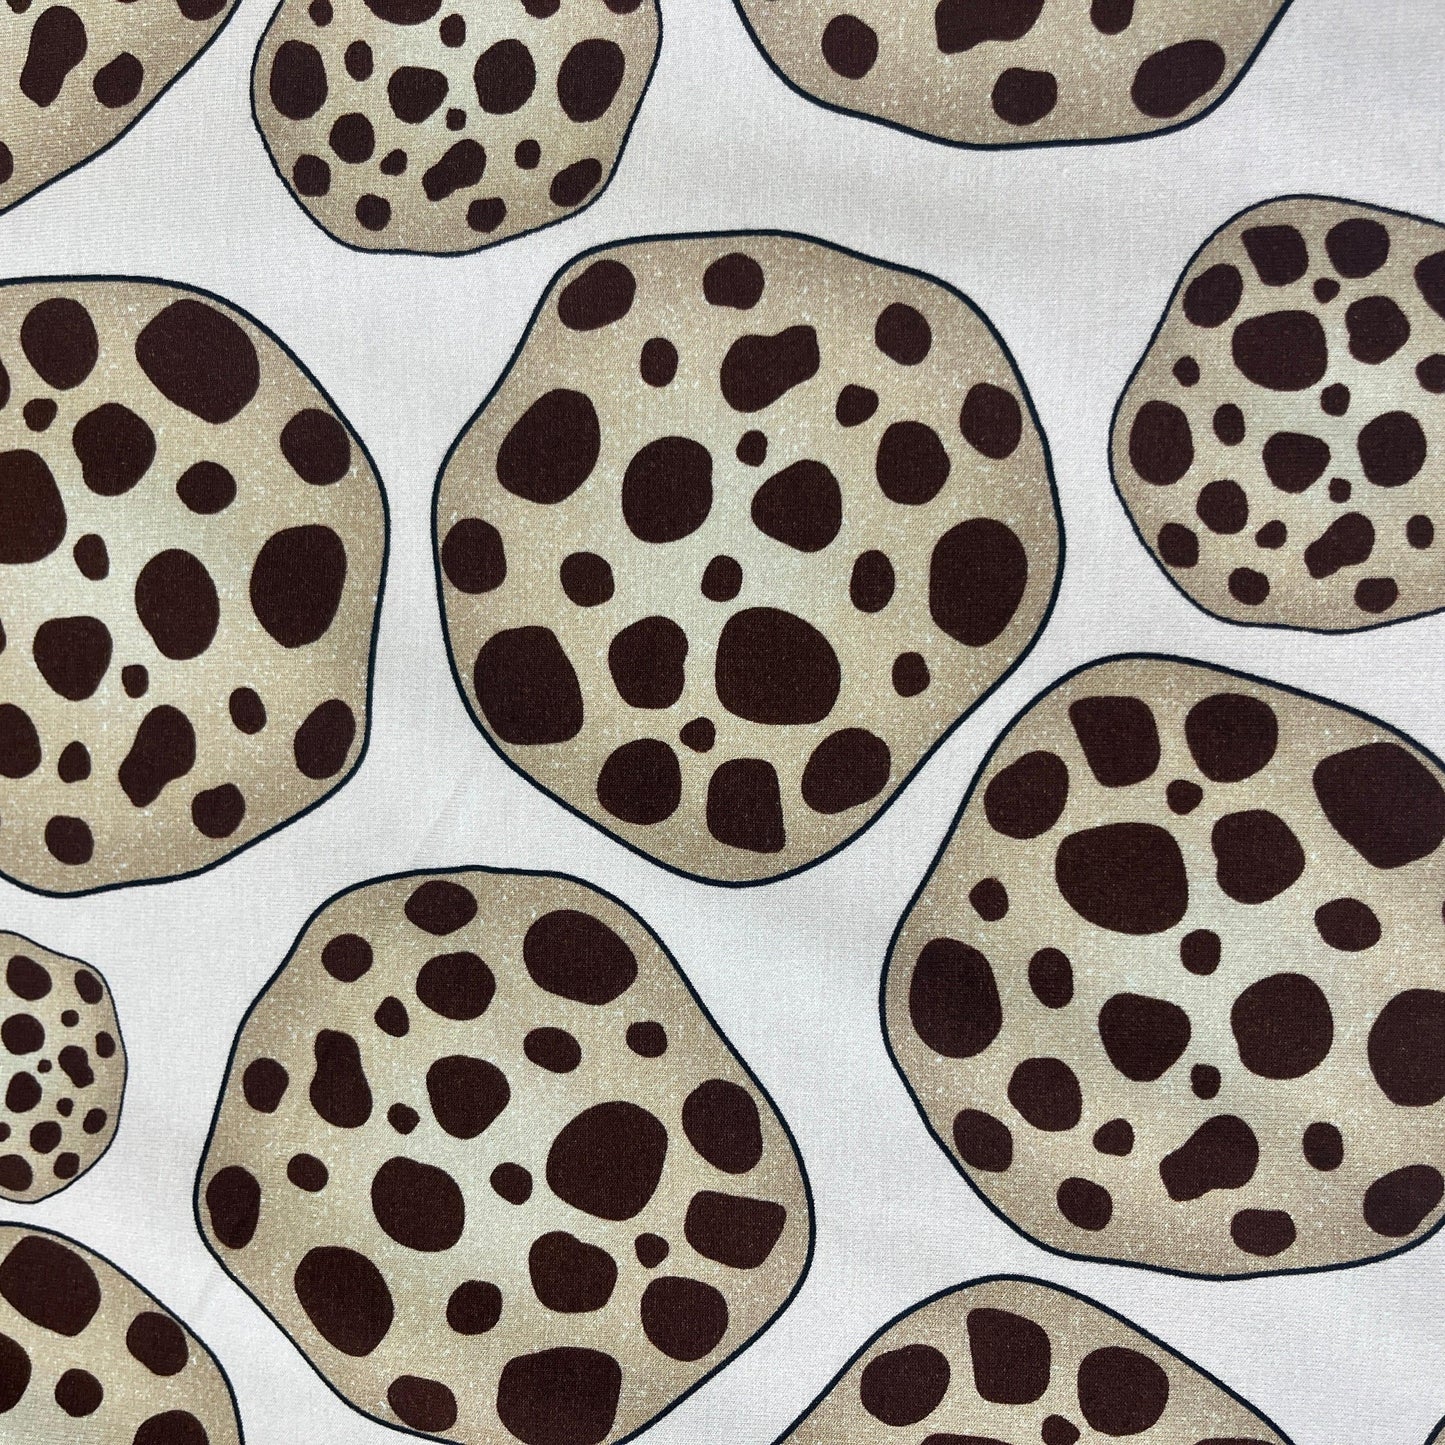 Chocolate Chip Cookies on Pink Bamboo/Spandex Jersey Fabric - Nature's Fabrics